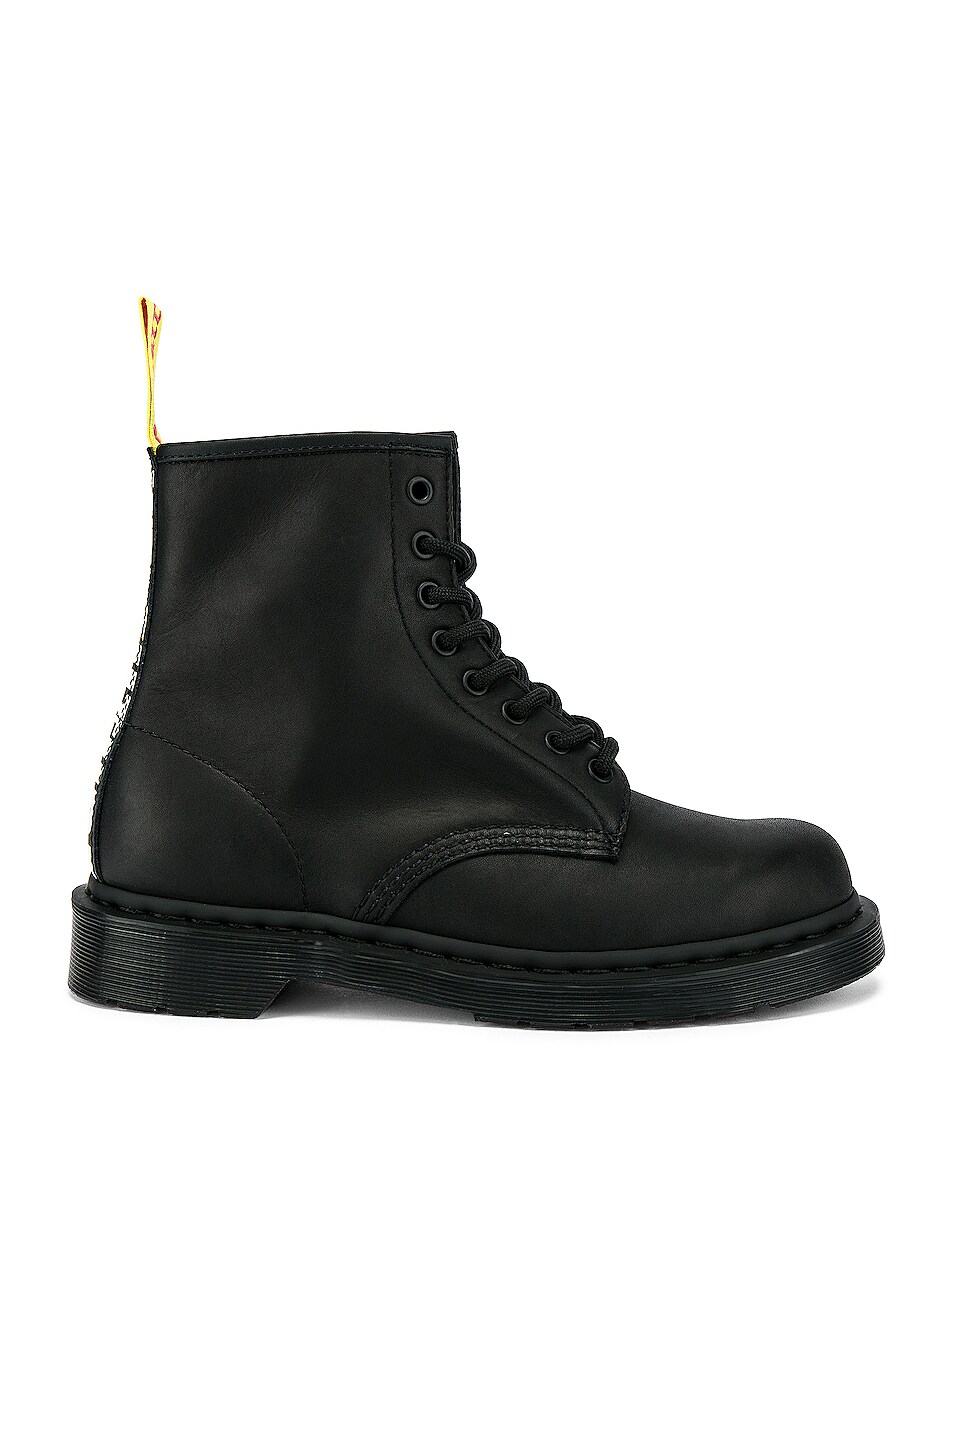 Image 1 of Dr. Martens x Sex Pistols 1460 Boots in Black